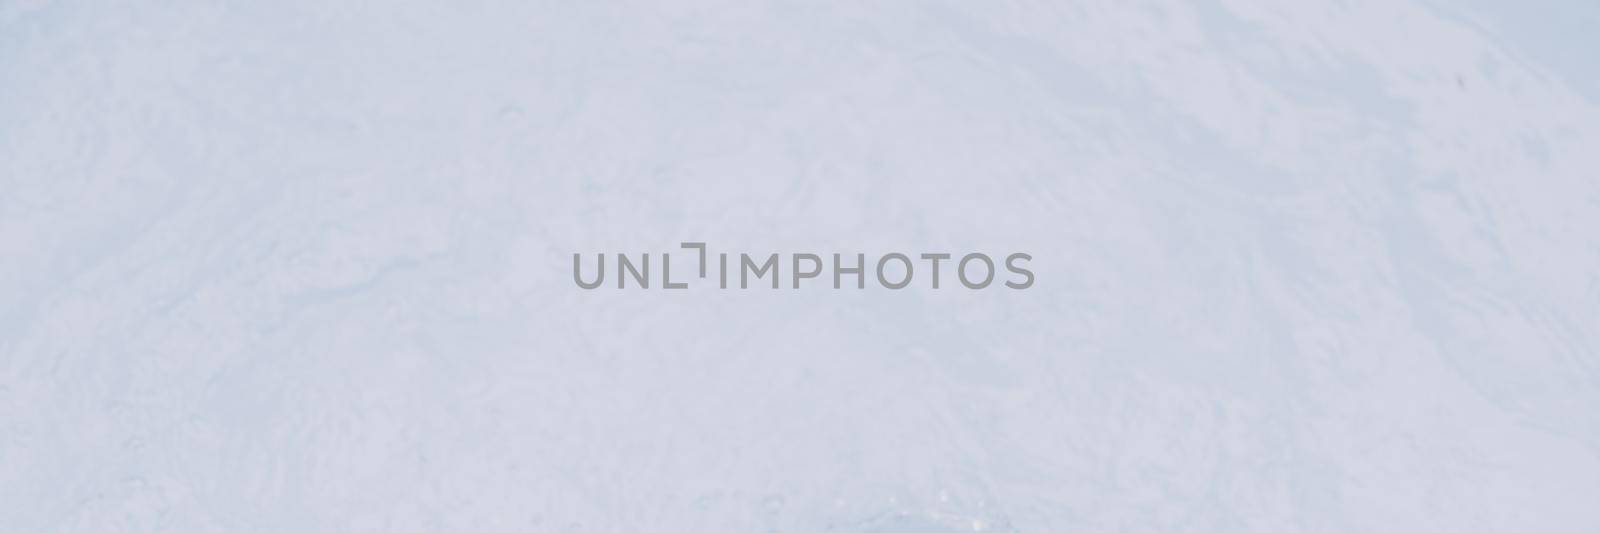 BANNER Abstract real nature water surface texture copy space soft abstract background. Light white blue Lavender colour. For presentation design works cards. Romance Relaxation simplicity Minimalism.